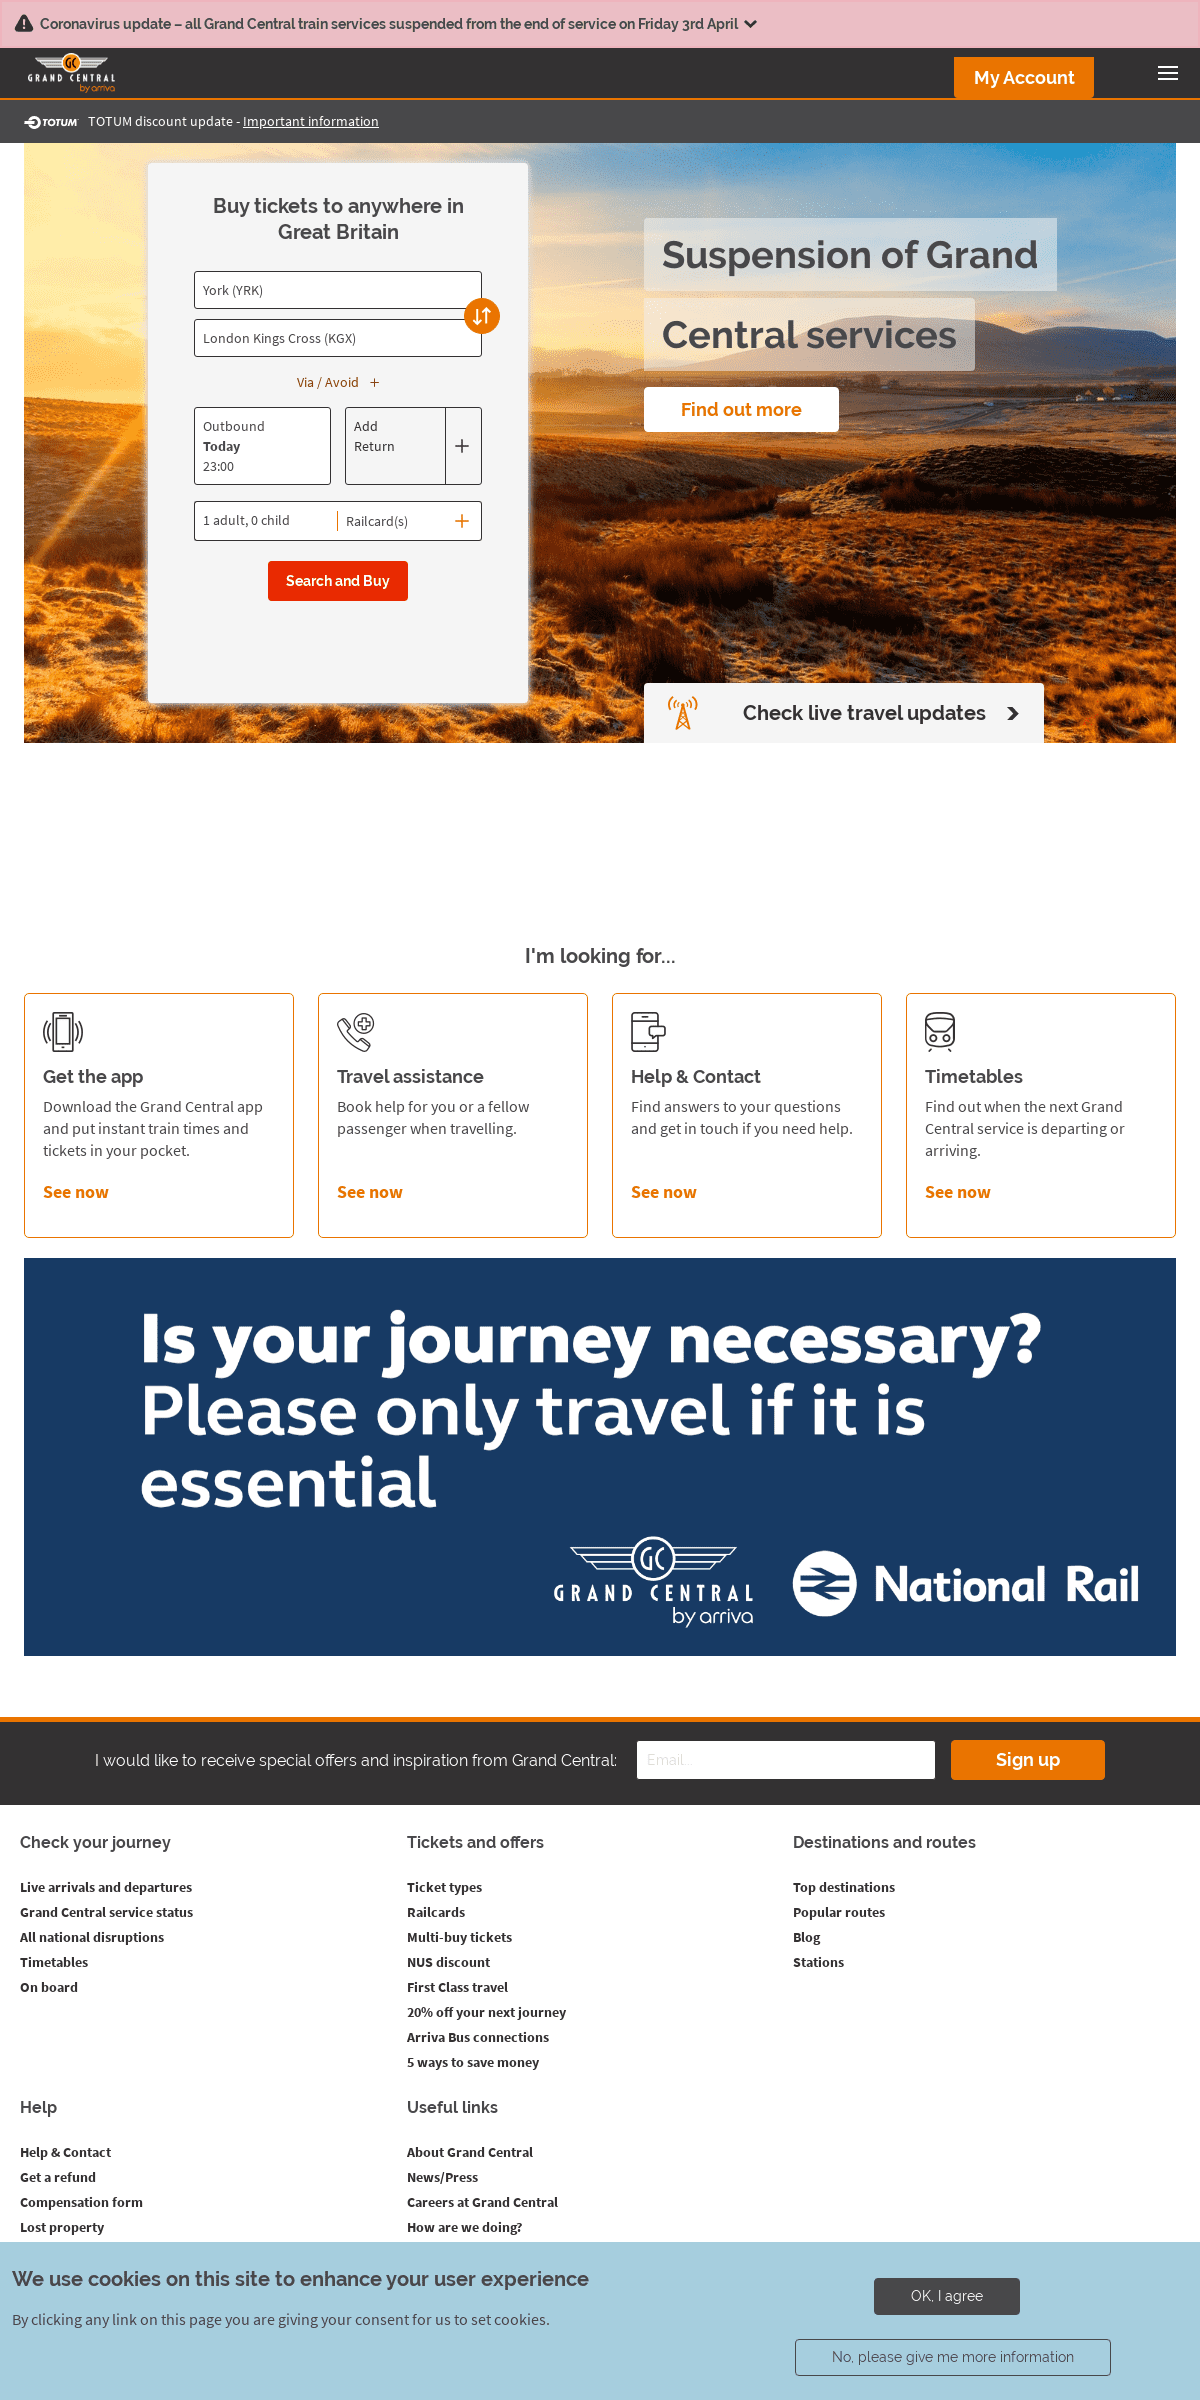 A complete backup of grandcentralrail.com